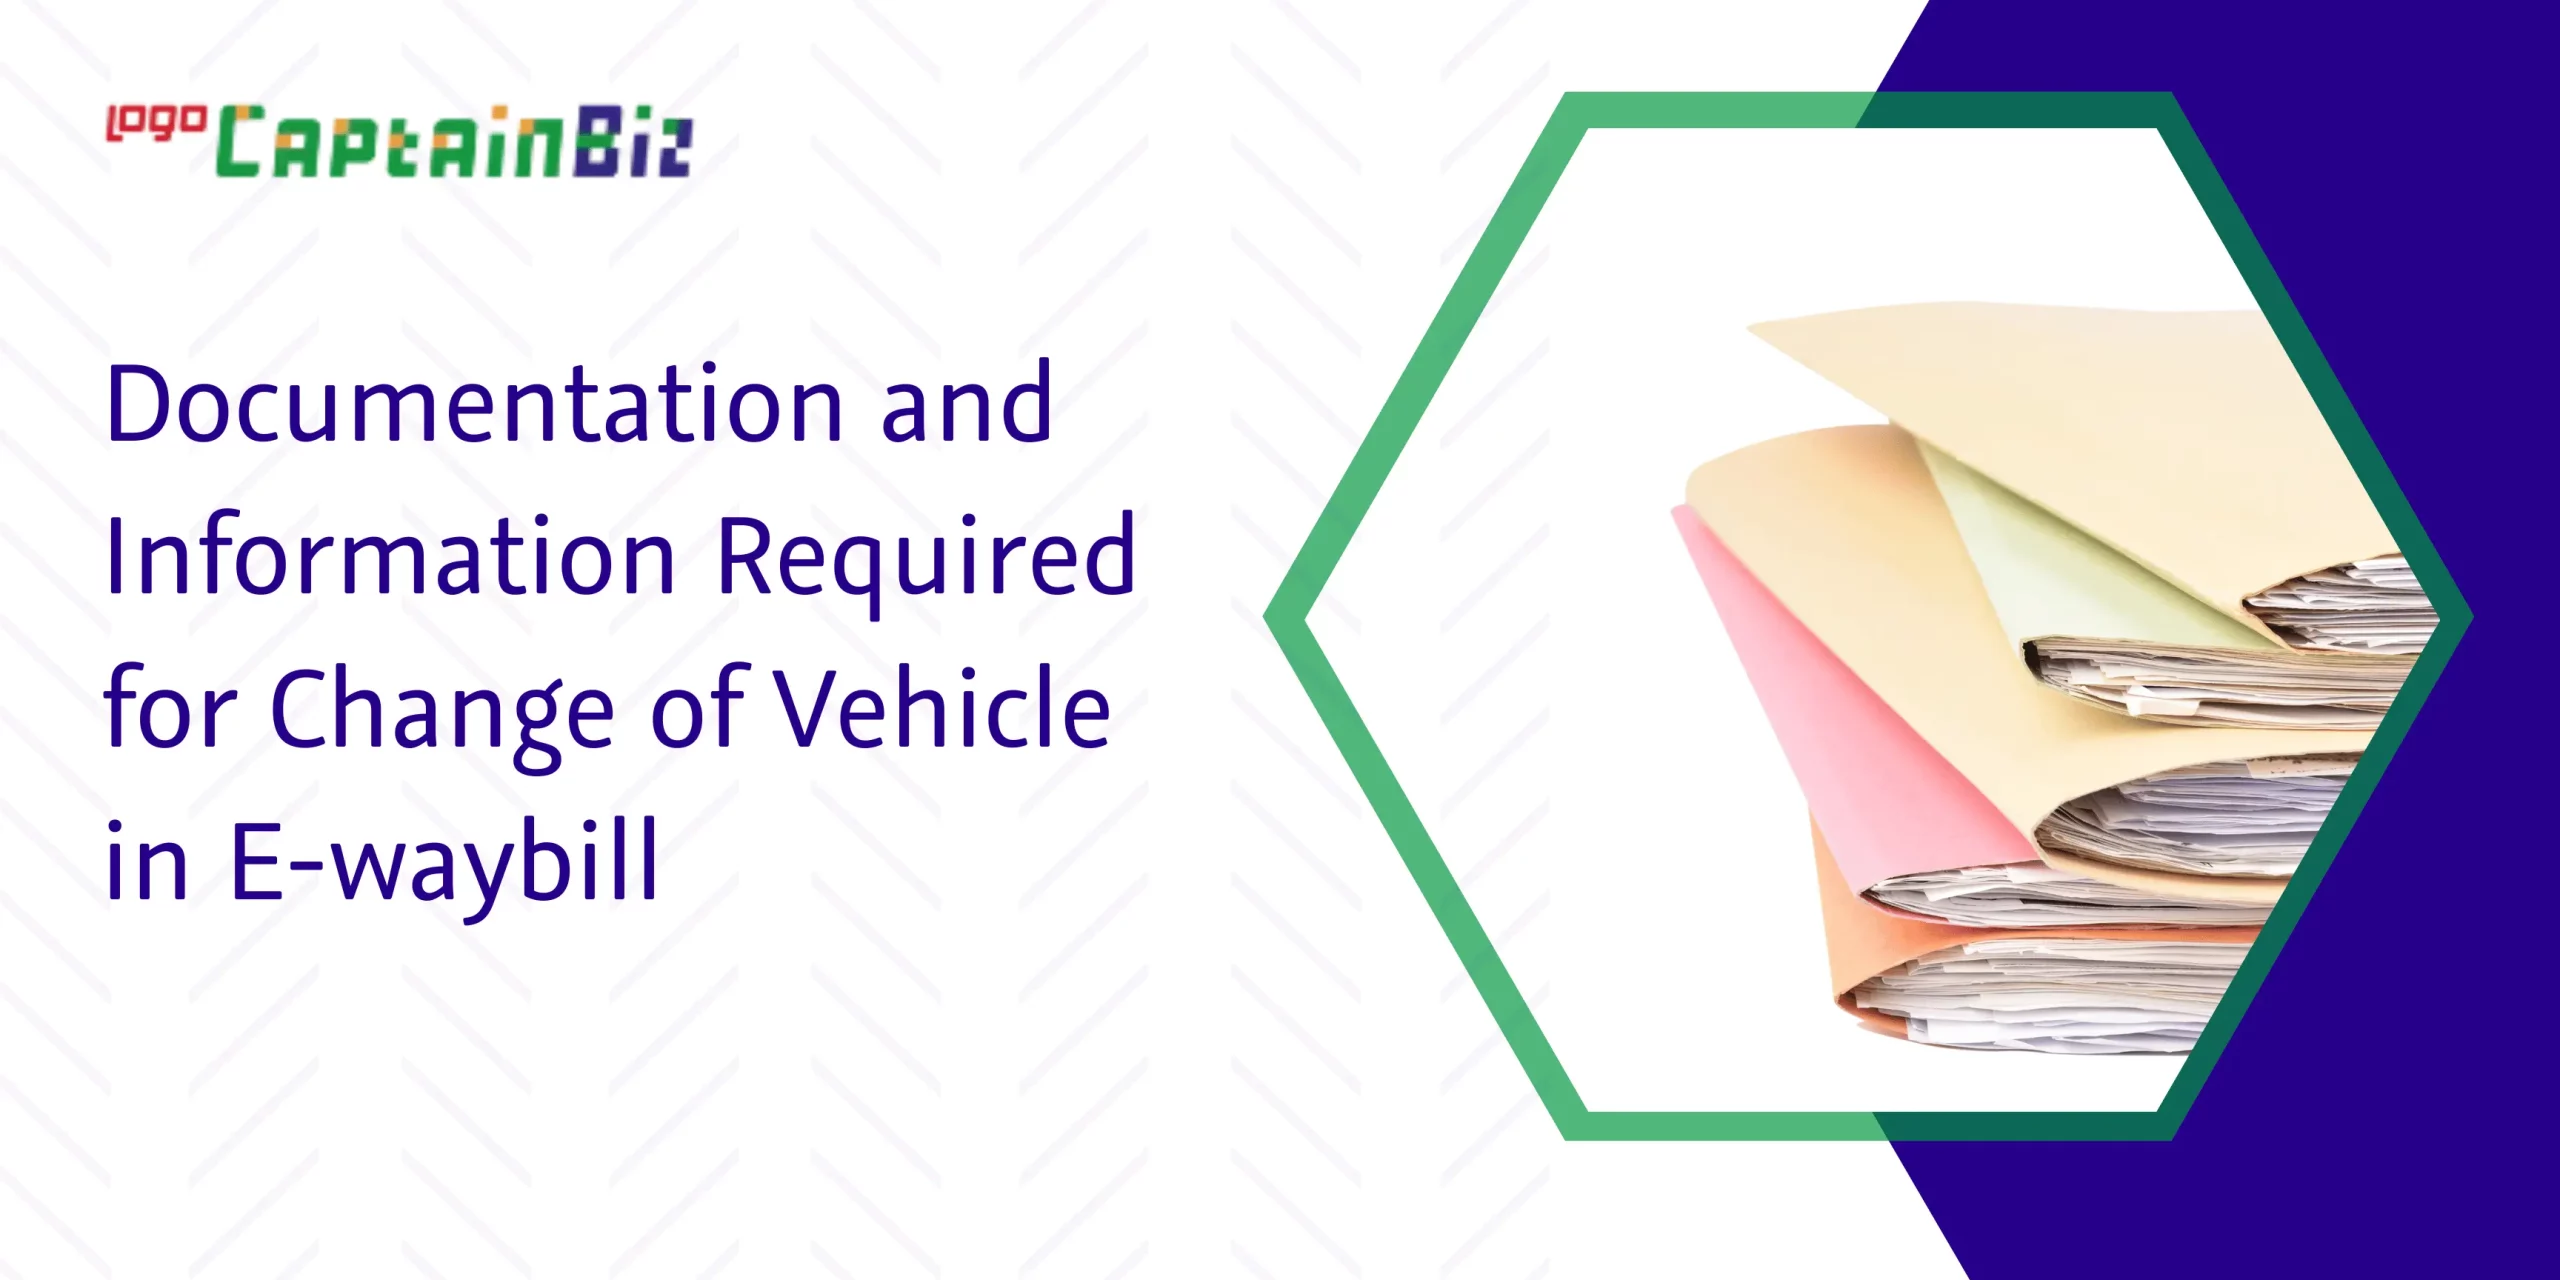 CaptainBiz: documentation and information required for change of vehicle in e-waybill